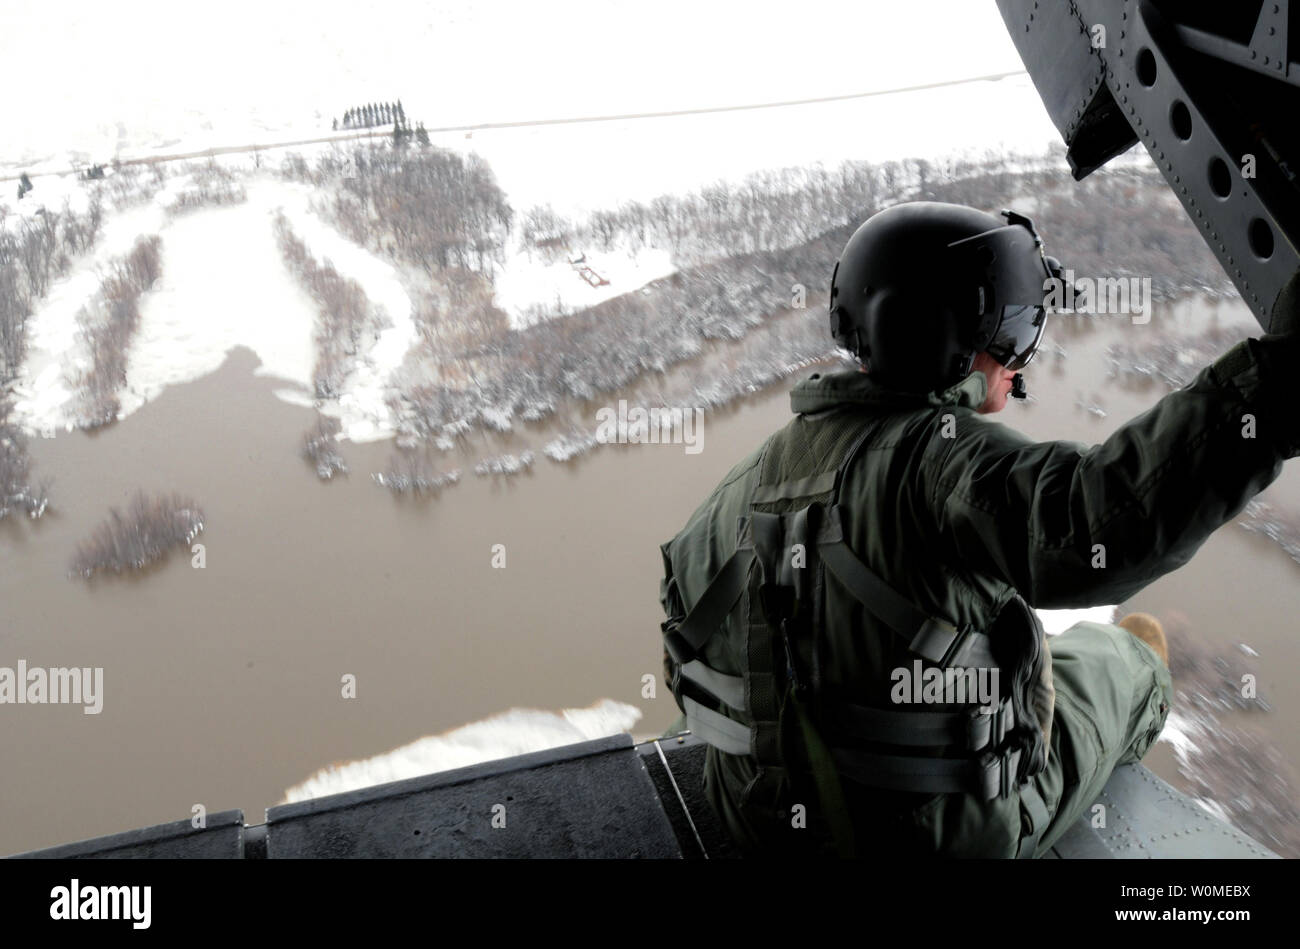 U.S. Army Staff Sgt. Jon Scarber, a flight engineer, looks out over the flooded Red River along the North Dakota/Minnesota border from a CH-47D Chinook helicopter on April 1, 2009. The Montana Army National Guard is assisting flood relief efforts and is conducting orientation flights to familiarize aviators and Soldiers with possible hazards in the region. (UPI Photo/Roger M. Dey/U.S. Army) Stock Photo